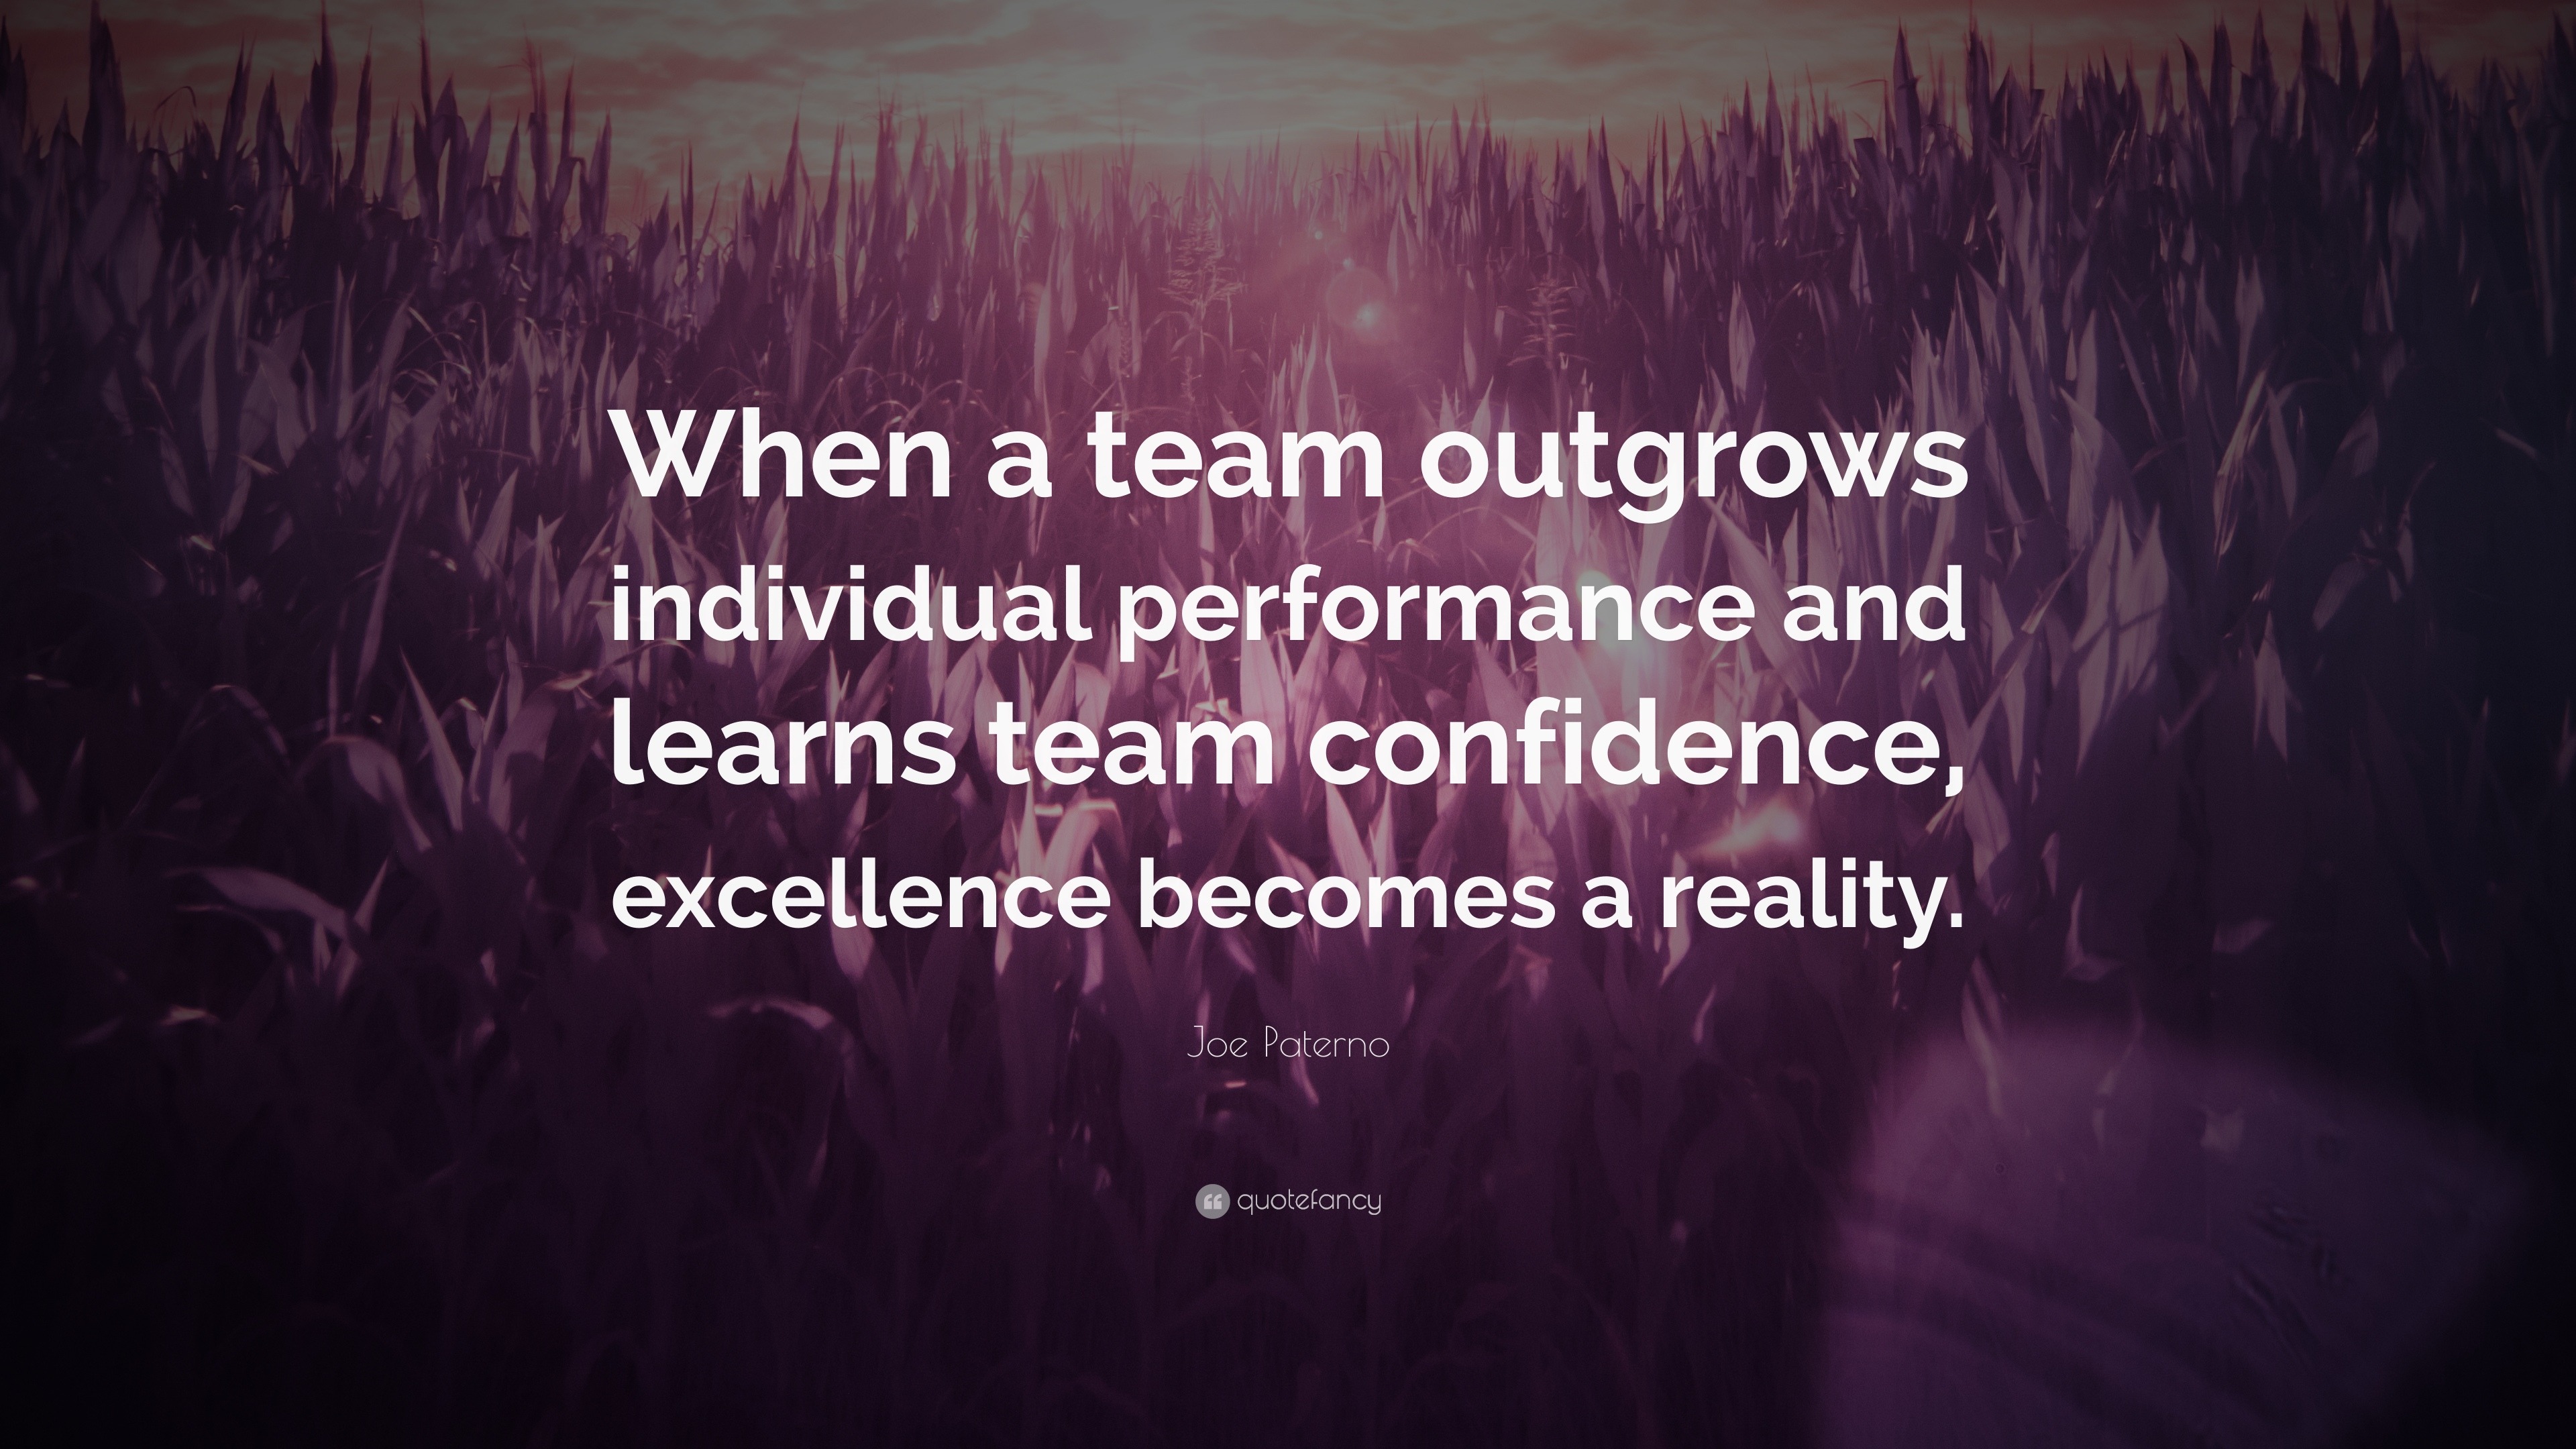 Joe Paterno Quote: “When a team outgrows individual performance and ...